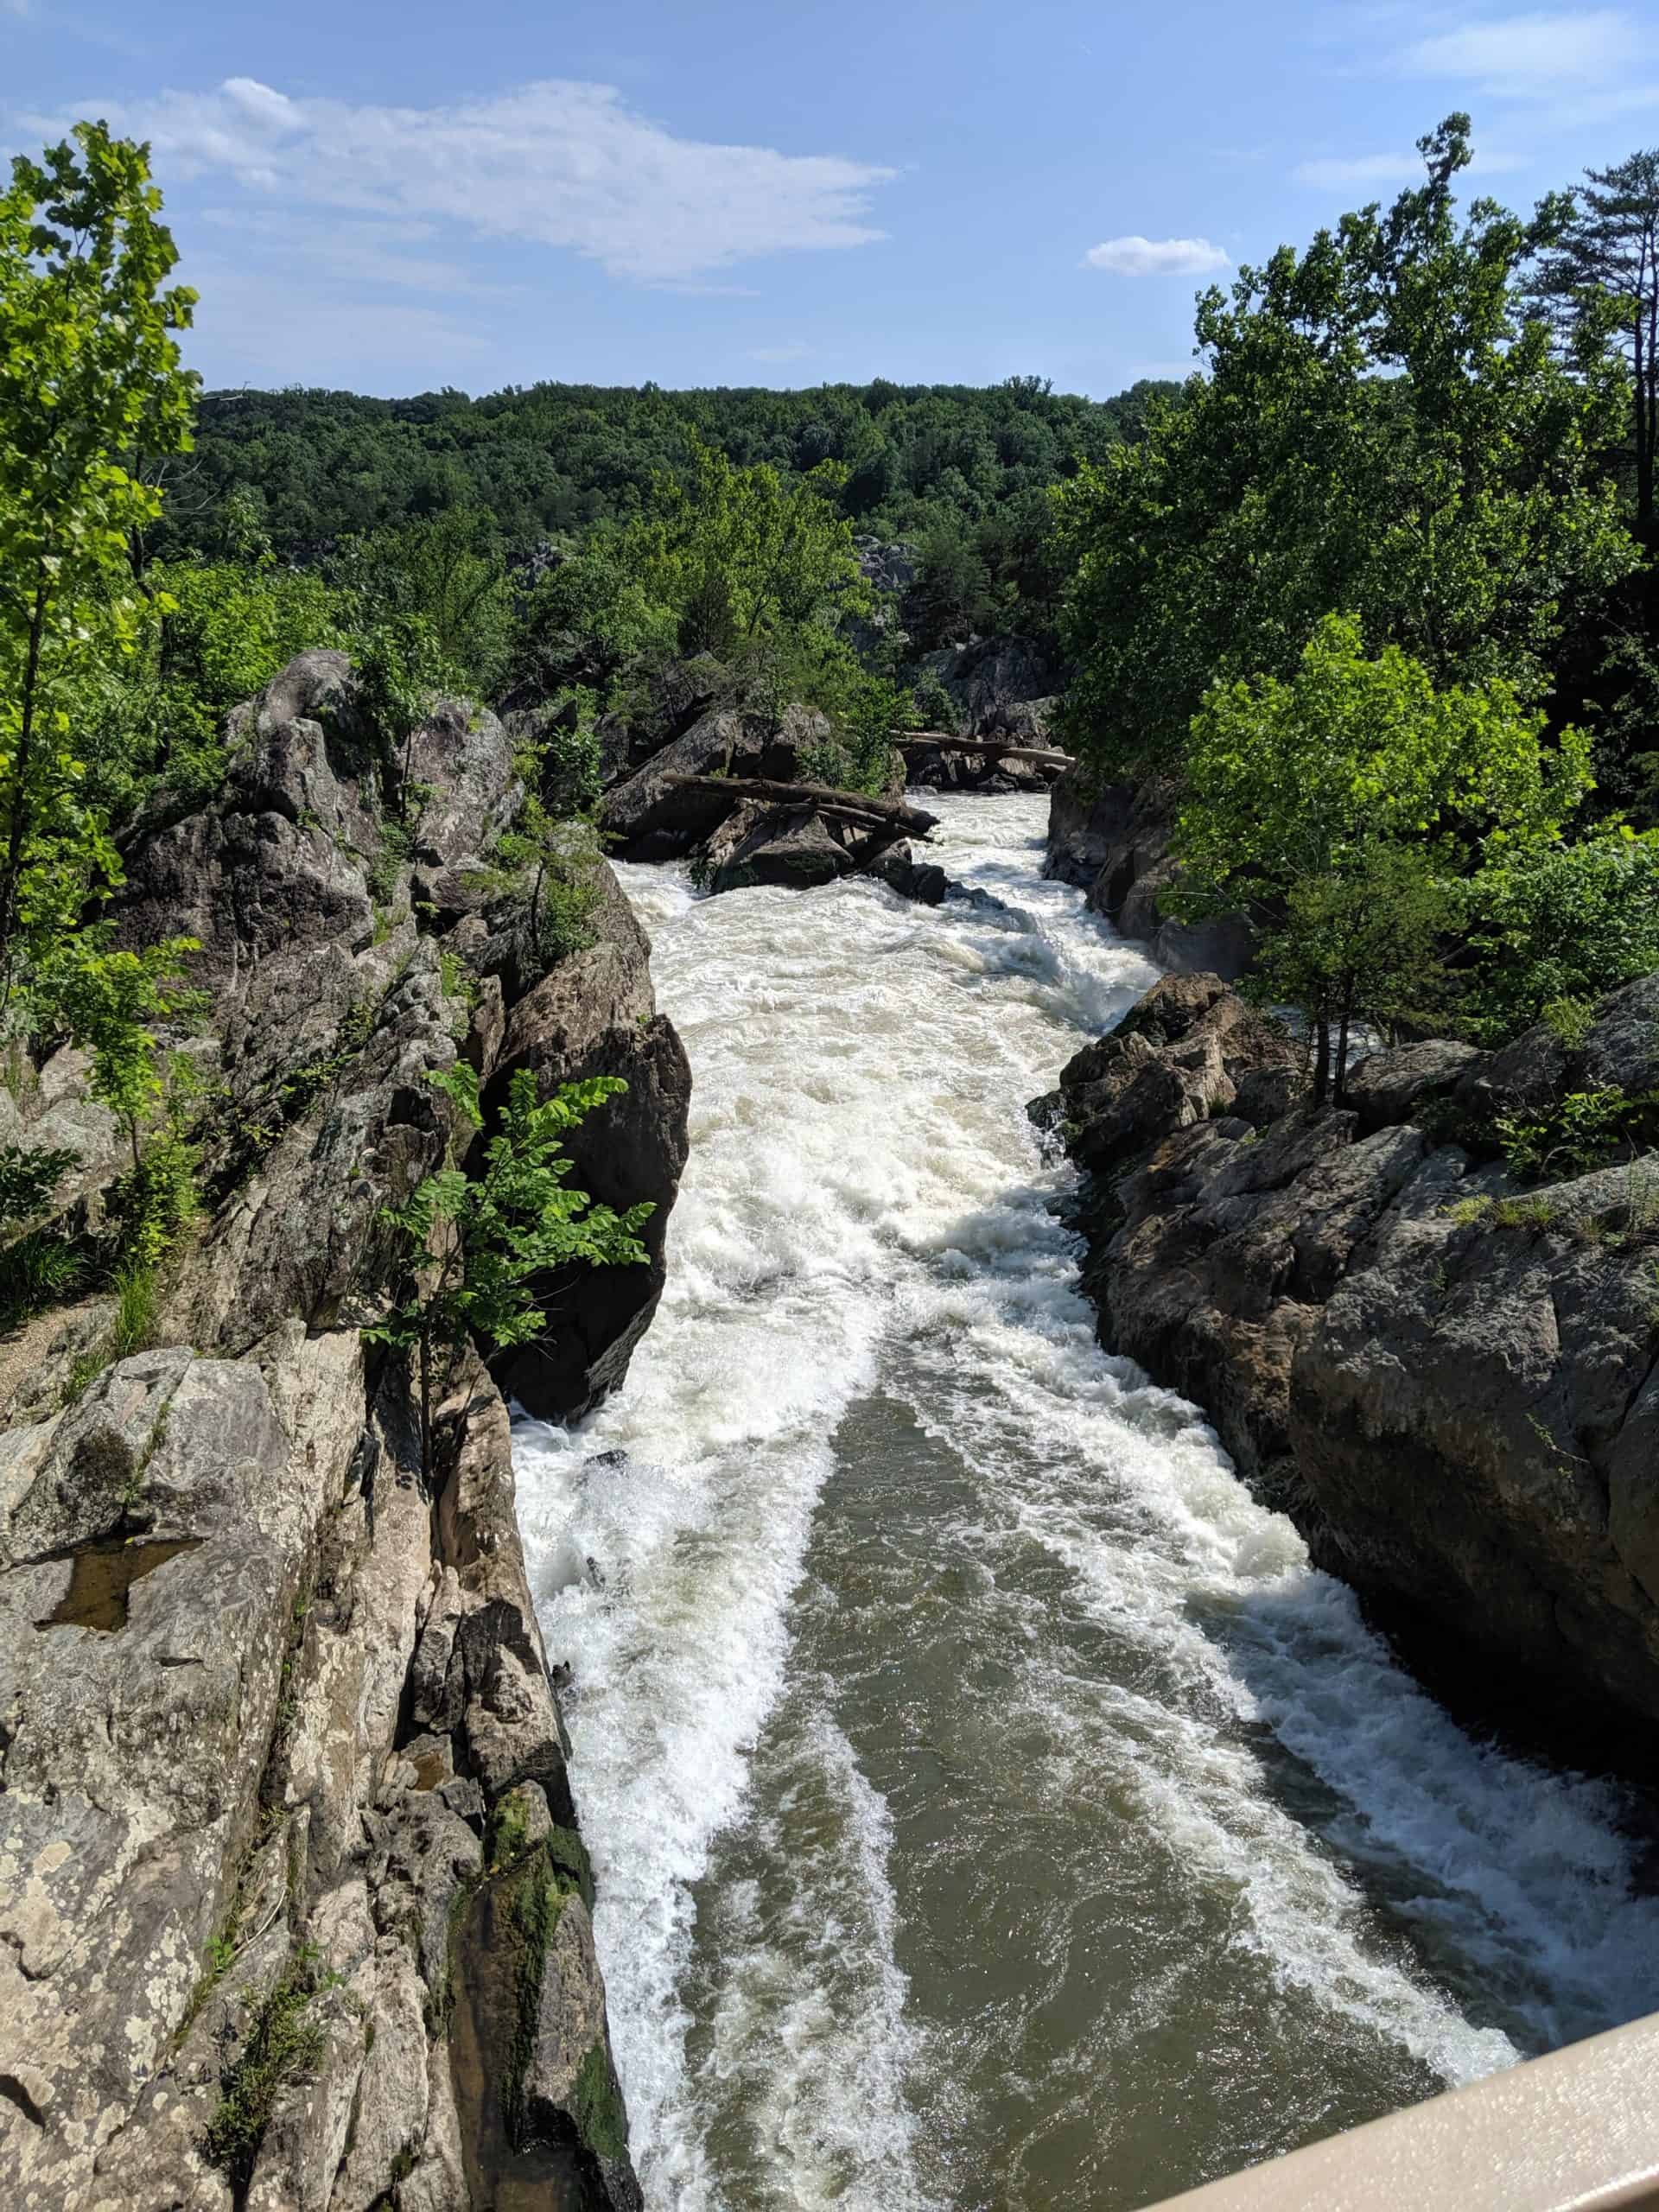 Best things to do in Washington DC - Mike Ferraco - Great Falls Park